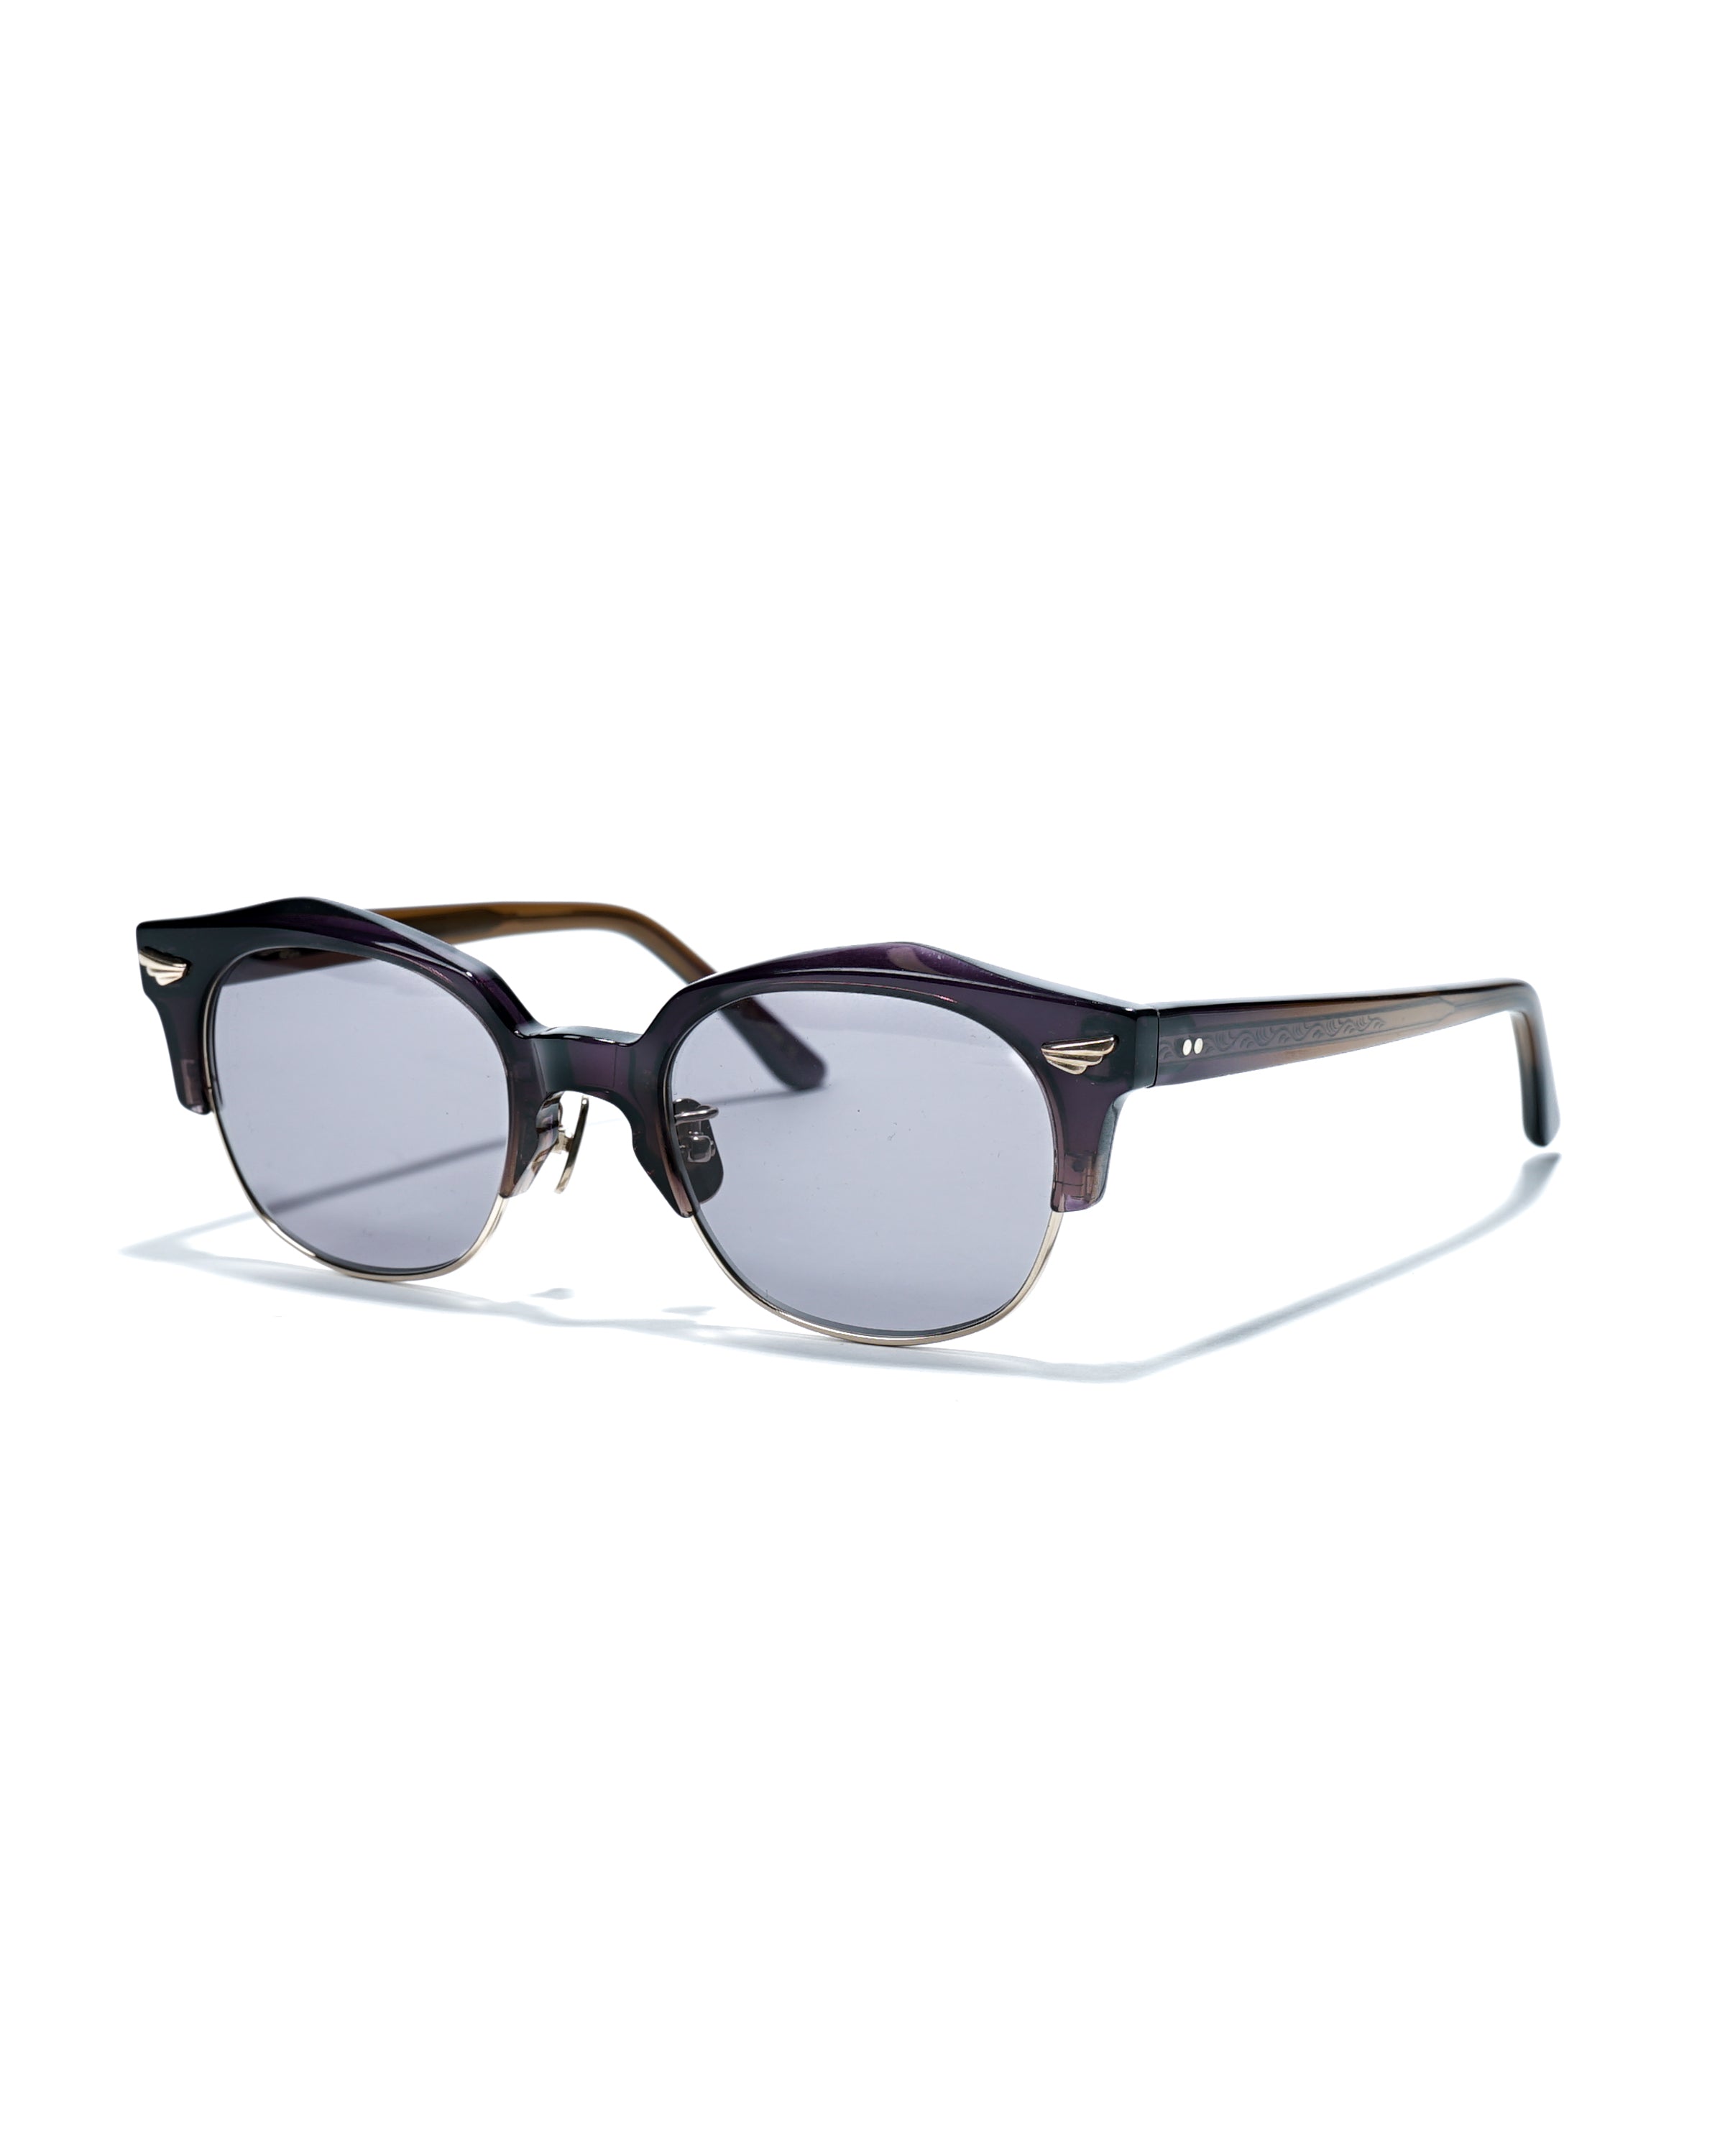 Groover Spectacles x NNY - Goround -  Purple/Brown